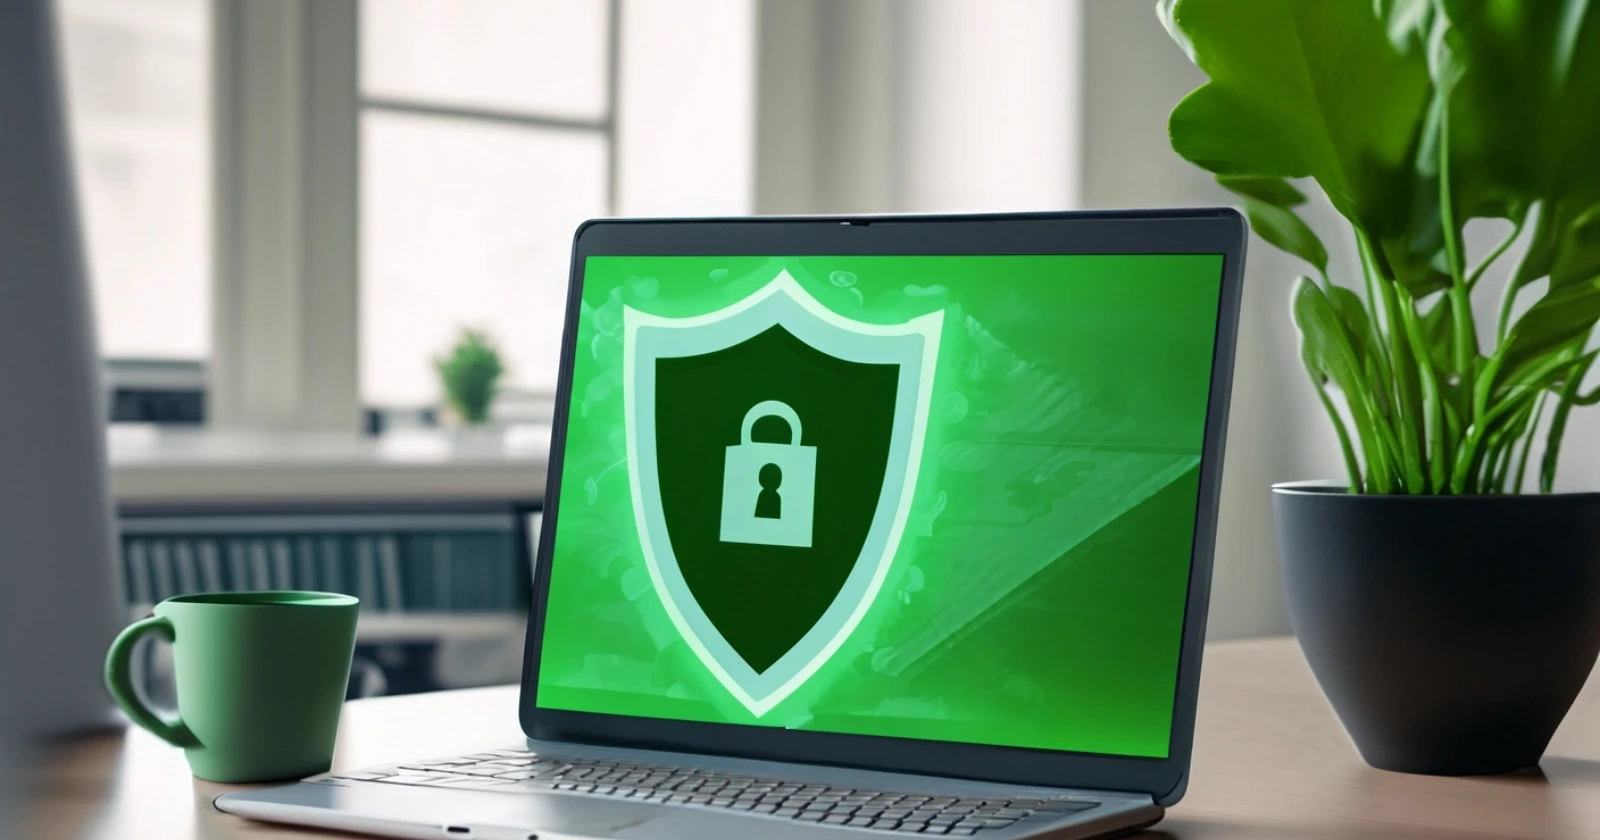 antivirus software for laptop, security protection virus shield 